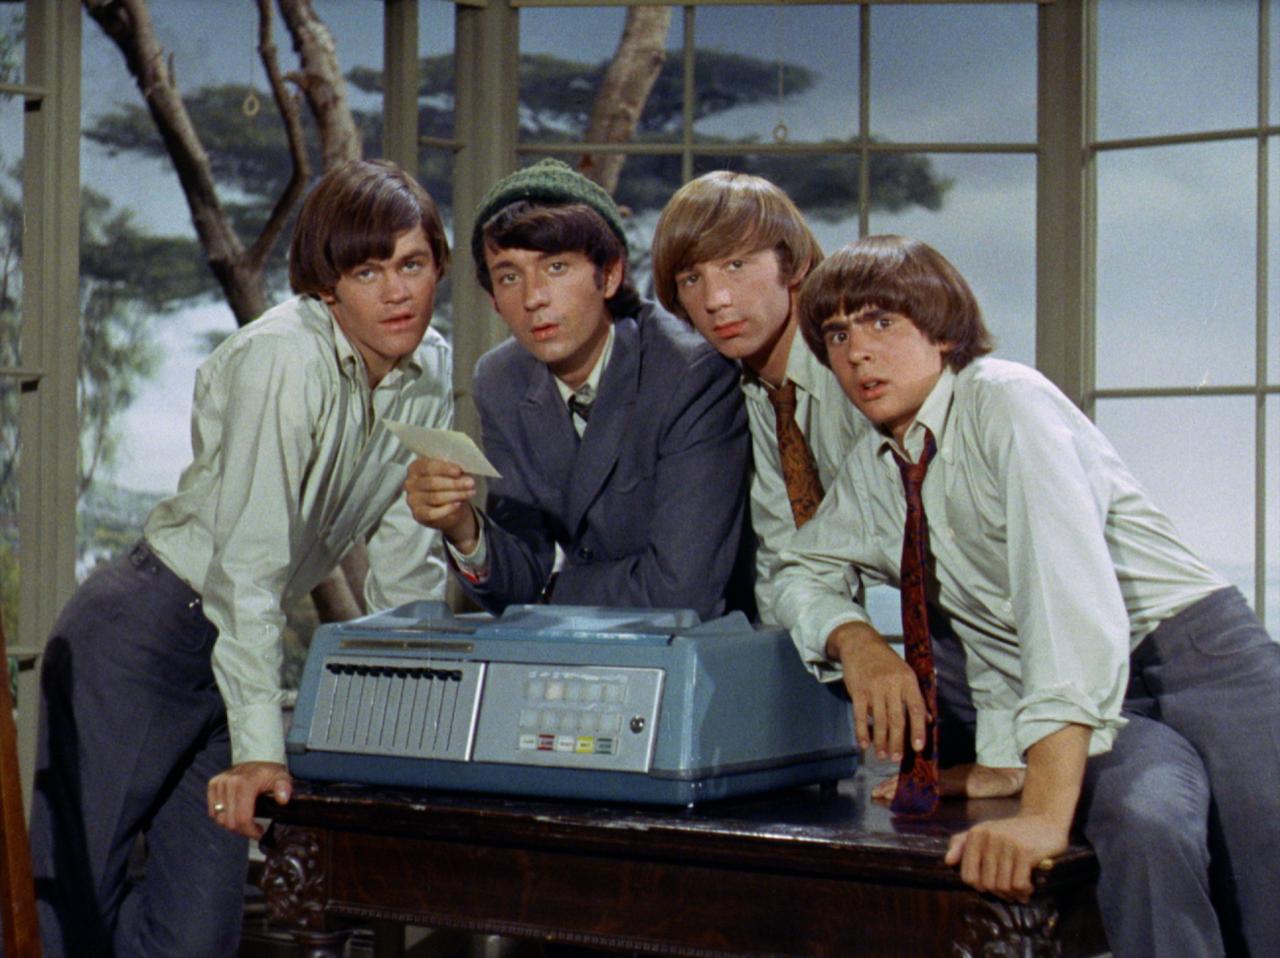 Monkees’ TV Series Coming to AXS TV